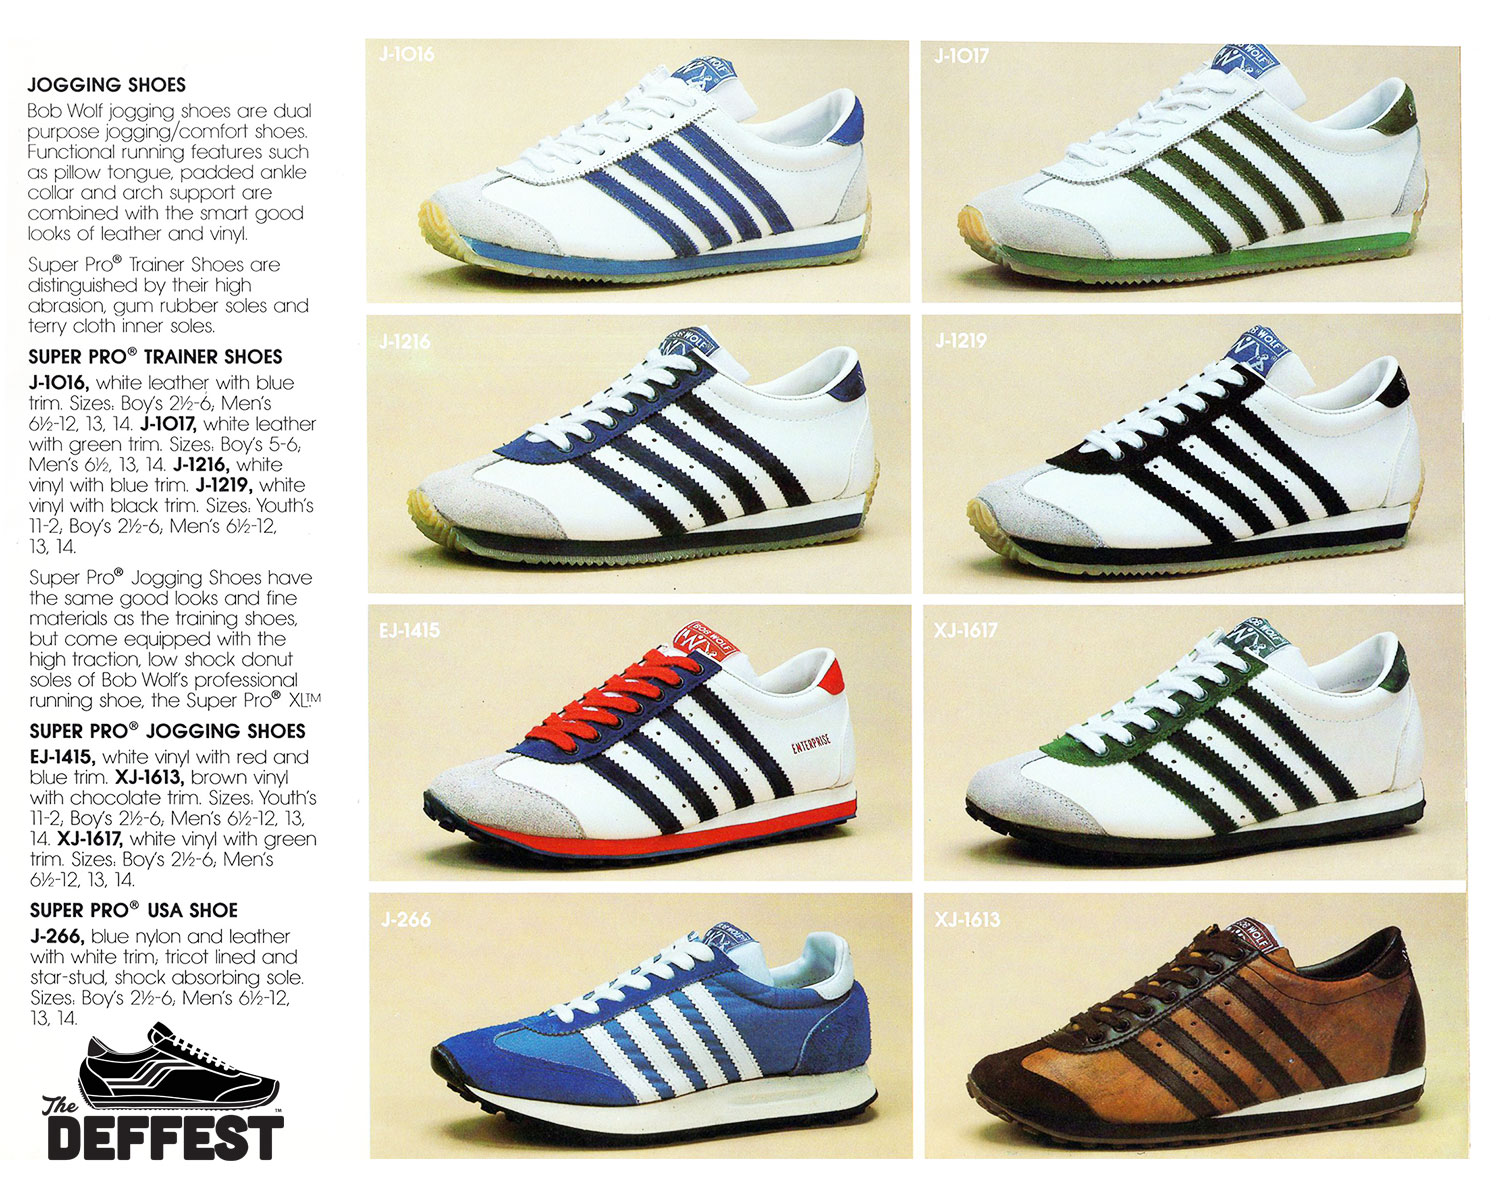 Bob Wolf 1978 - 1979 vintage sneakers catalog @ The Deffest